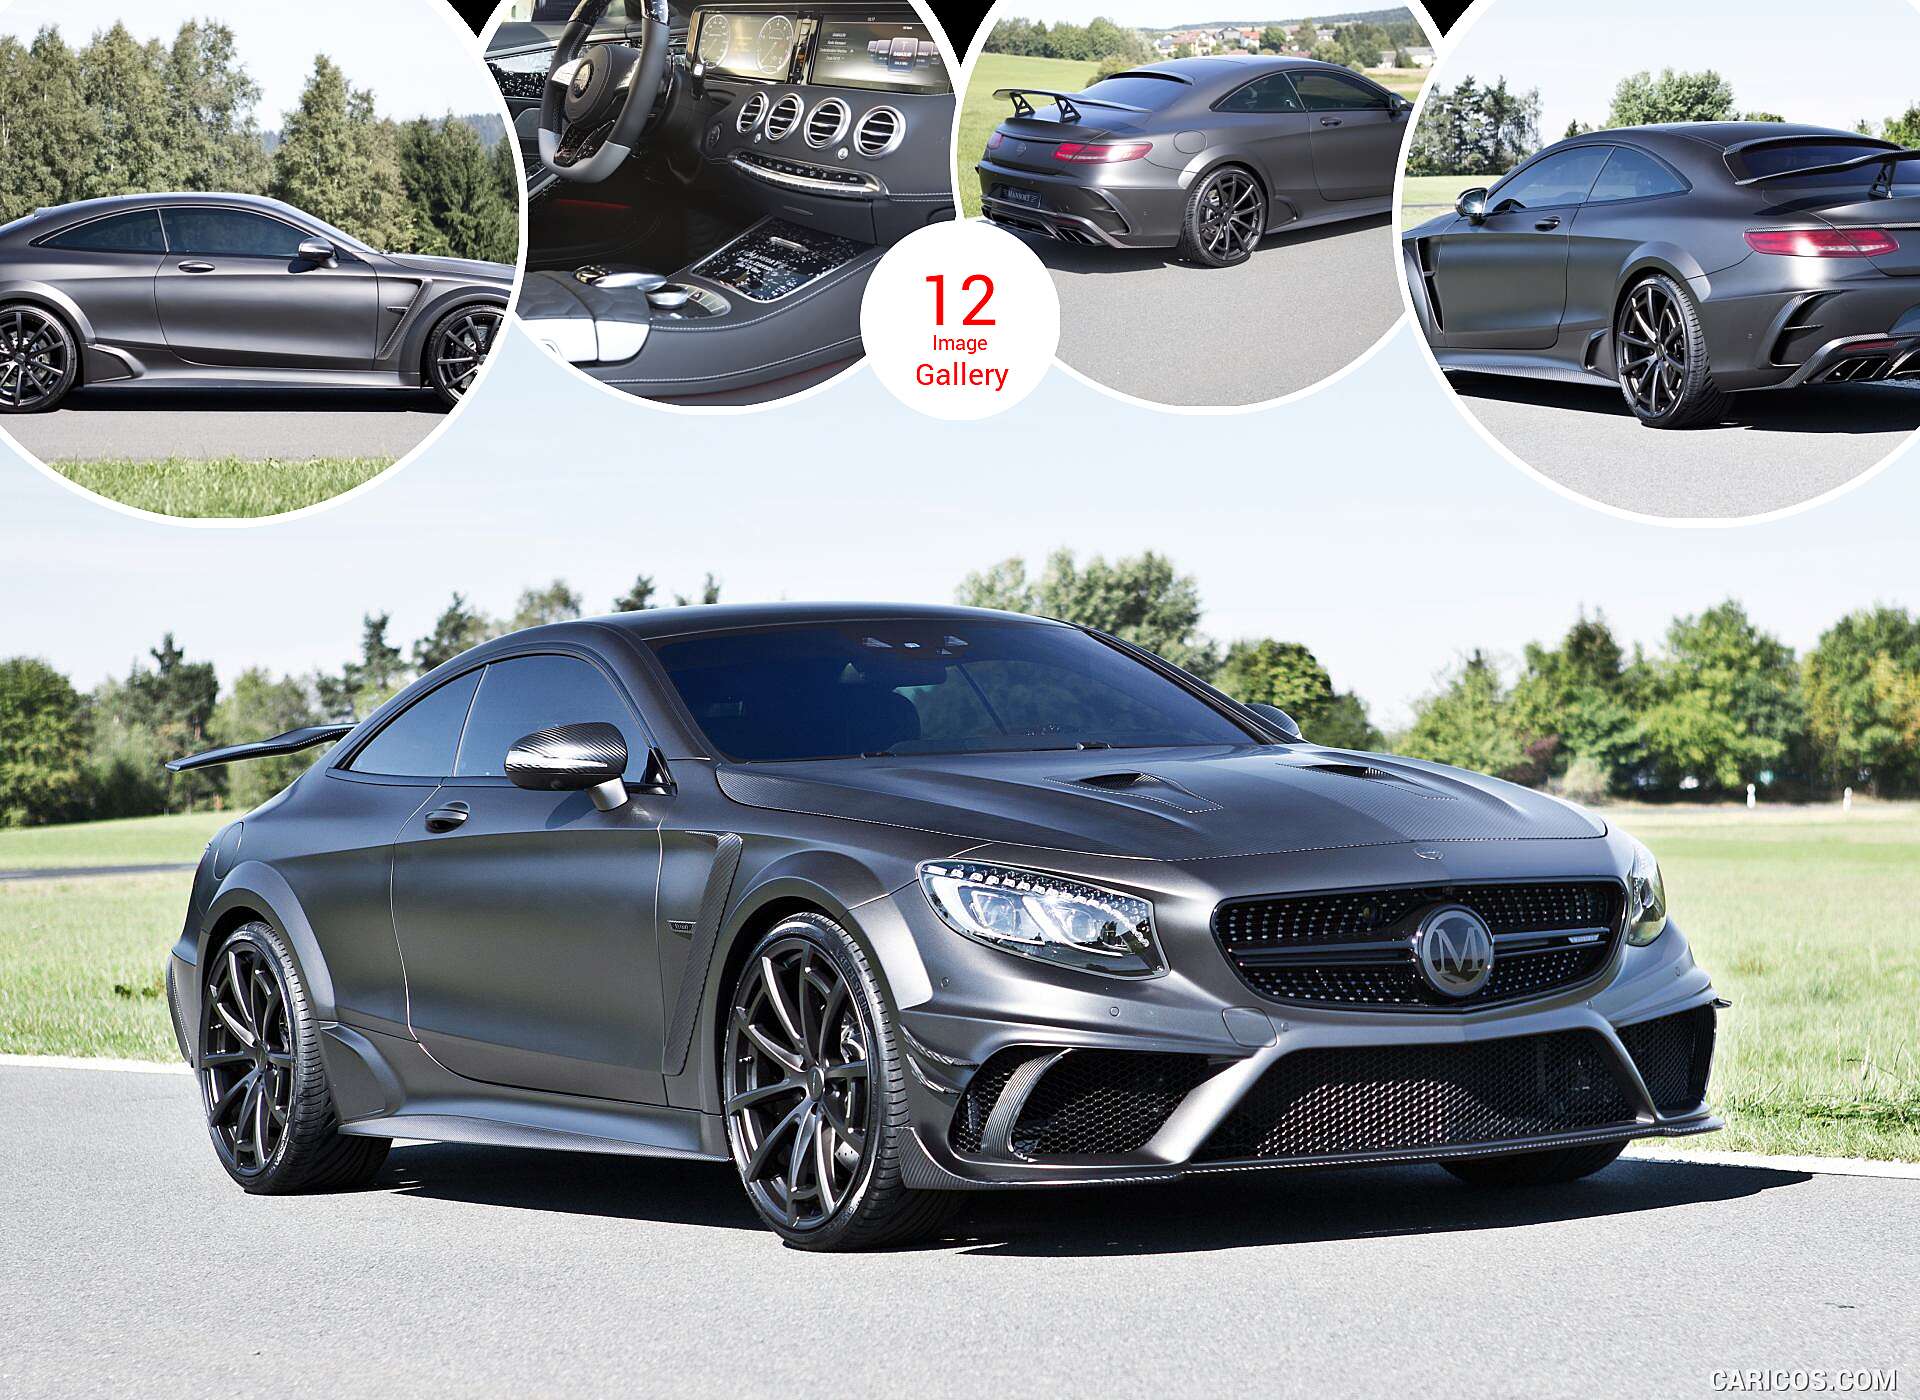 2015 Mansory Mercedes Benz S63 Amg Coupe Black Edition